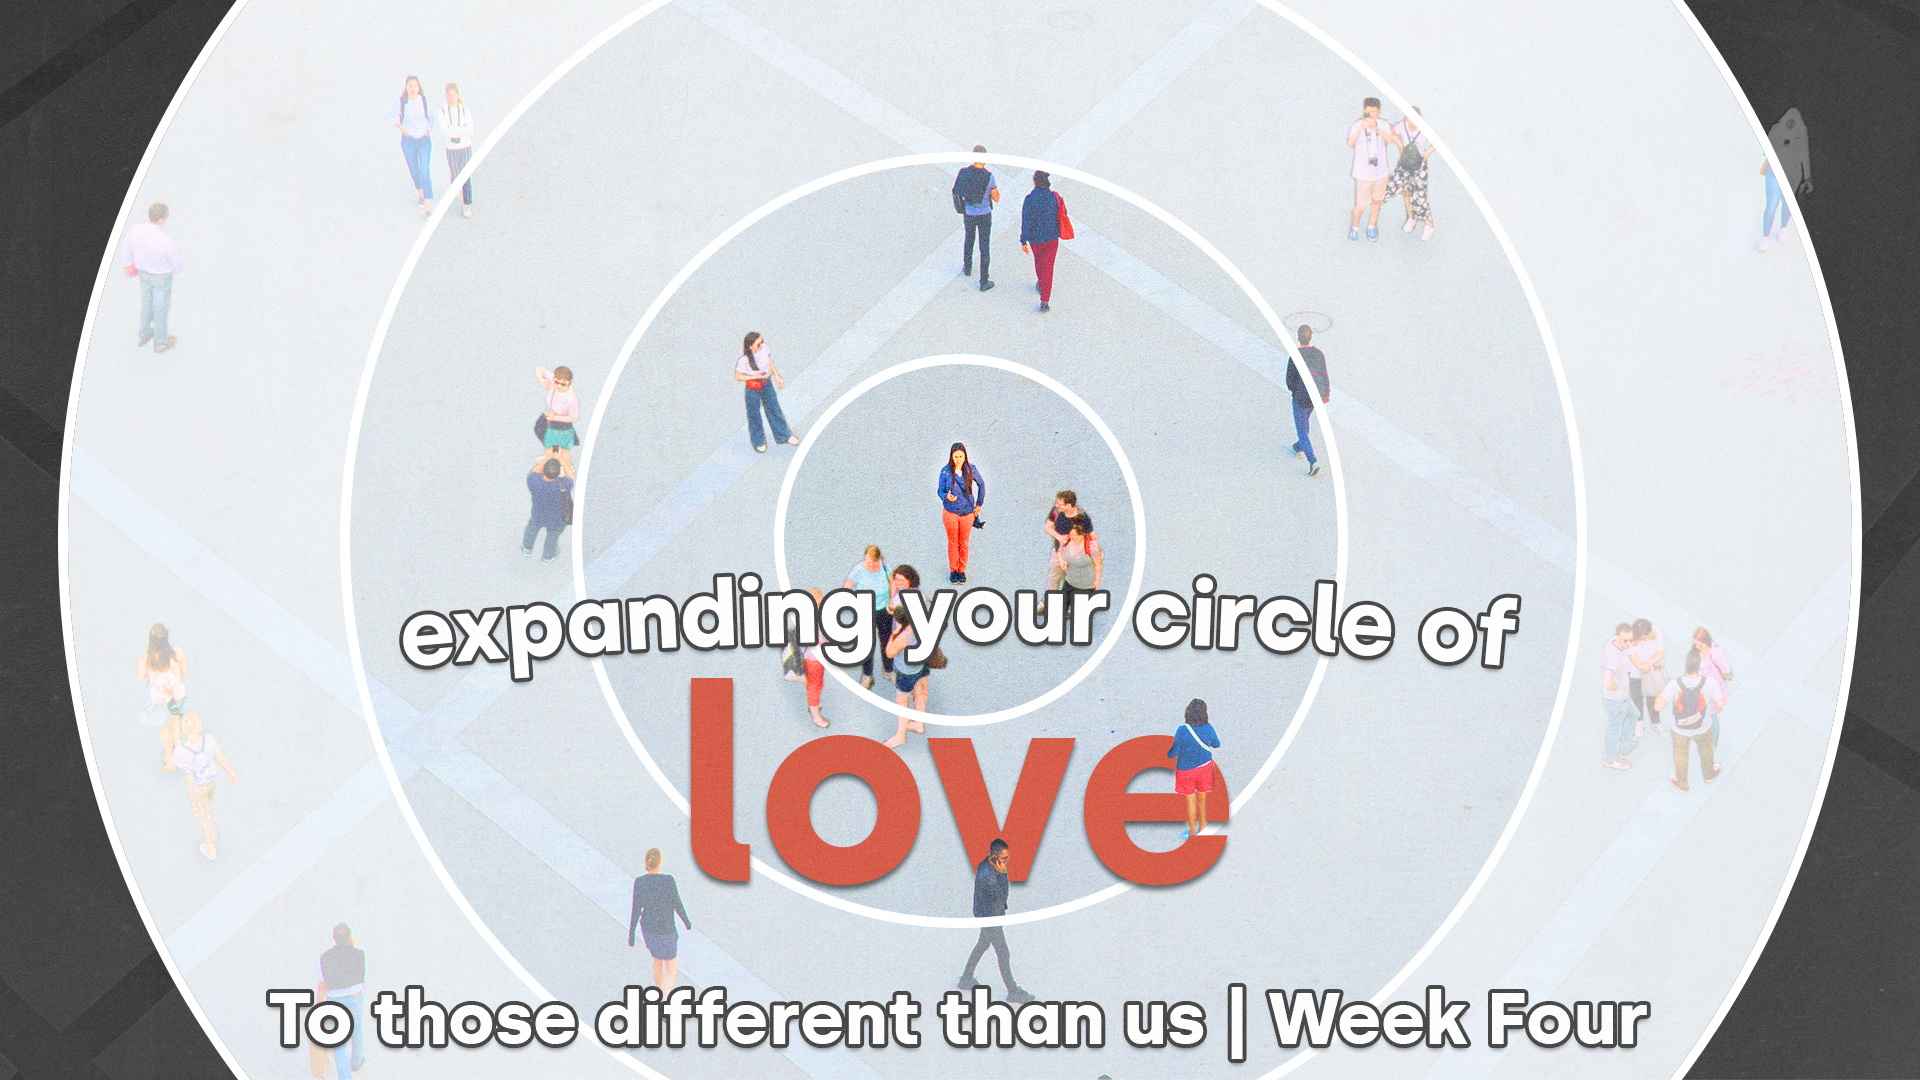 Expanding your circle of love to those different than us - Week Four